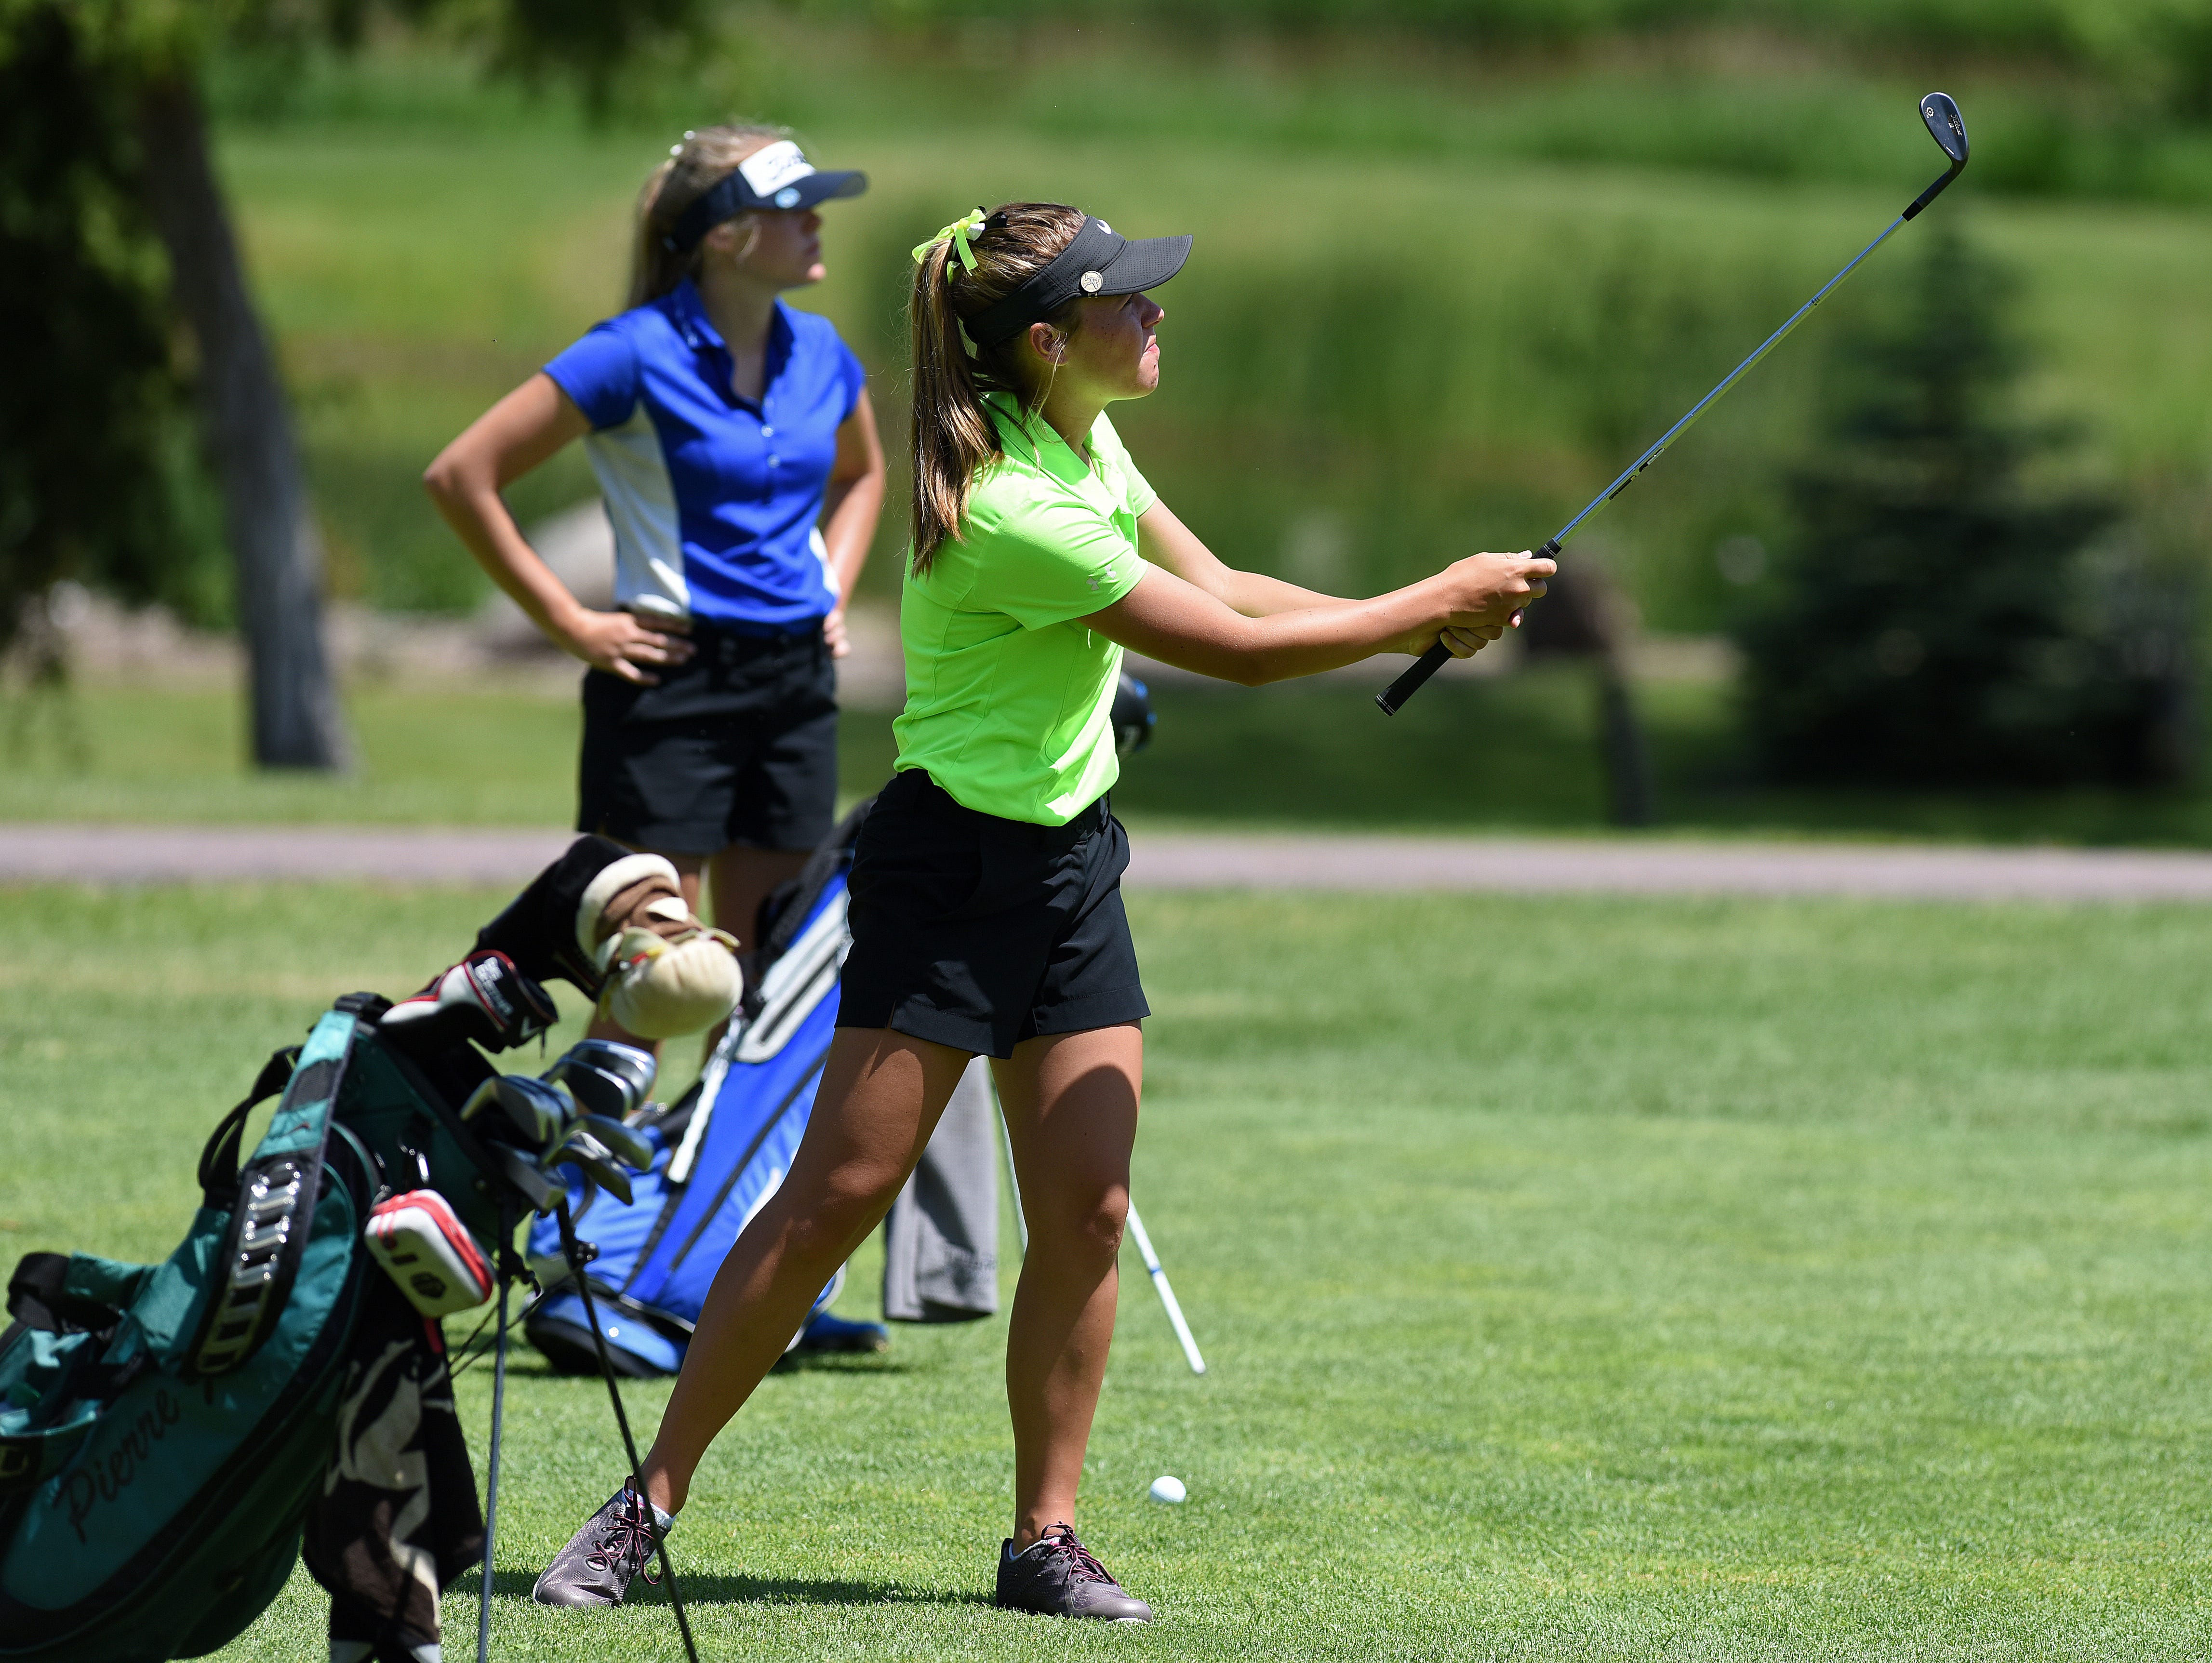 Pierre's Katie Barlett and RCS's Natalie Young golf during the girls state golf tournament at Lakeview Golf Course in Mitchell, S.D., Tuesday, June 7, 2016.